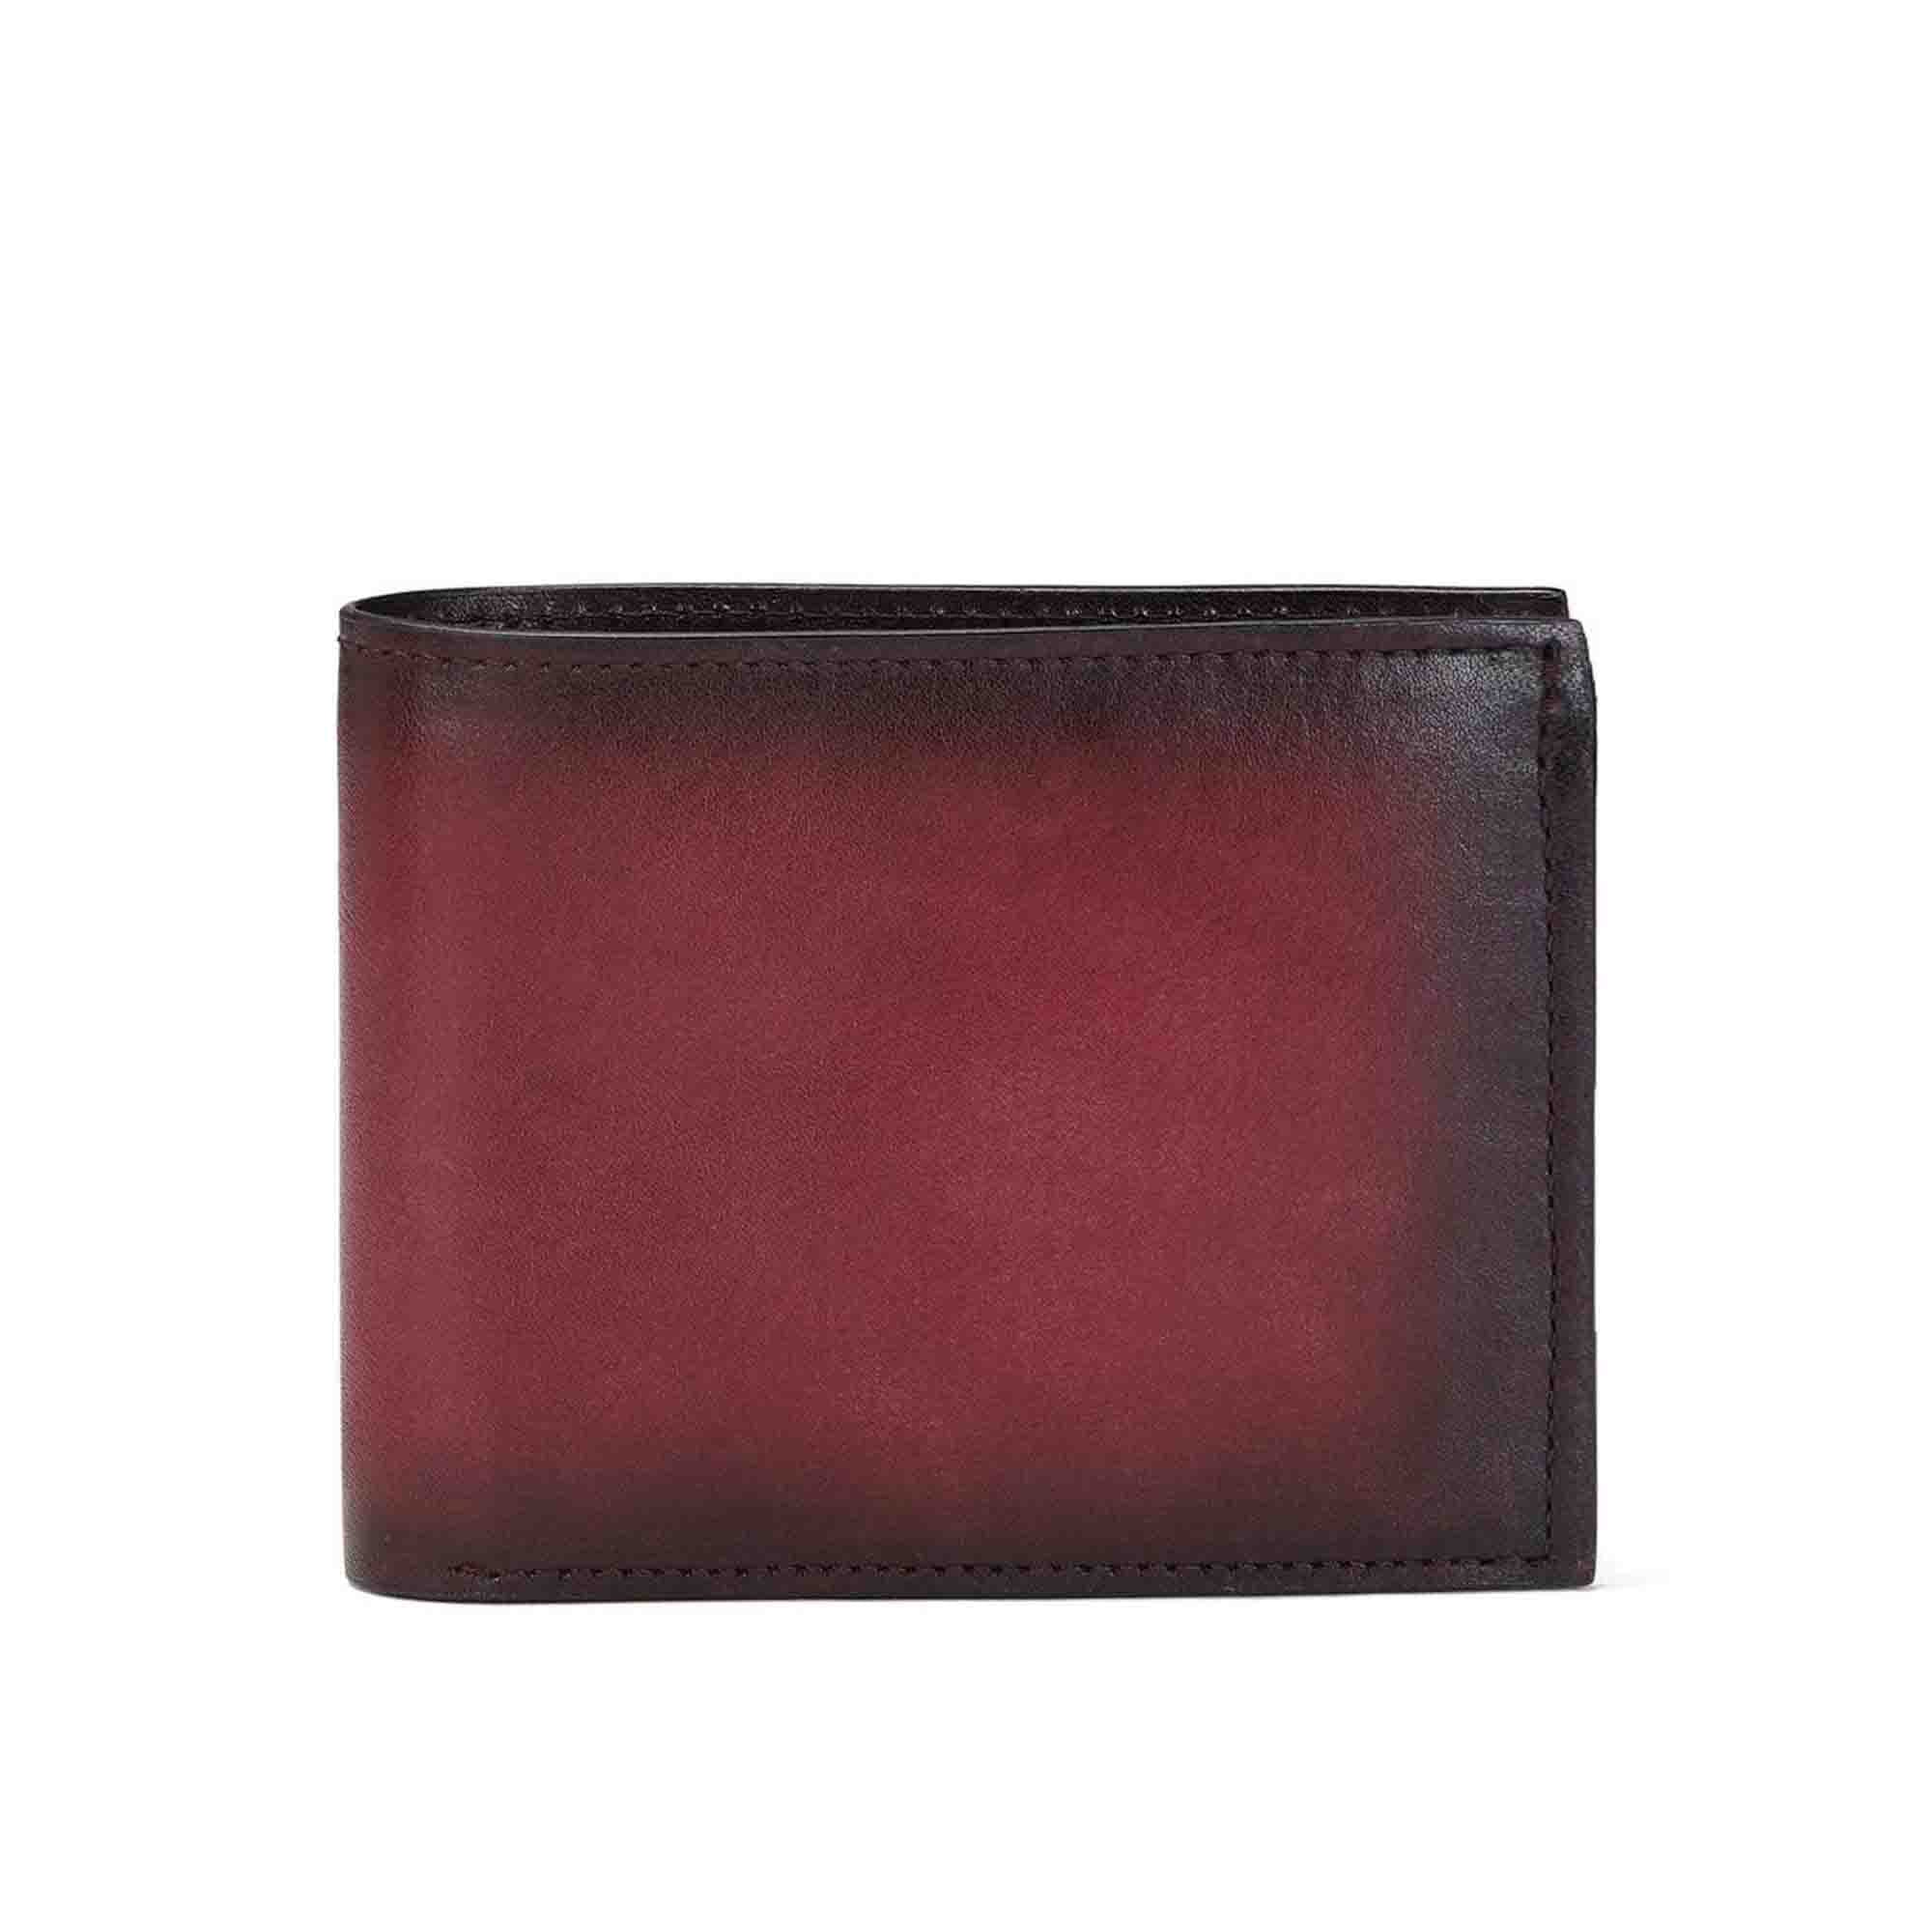 Mulberry Continental Leather Wallet, Ruby Red